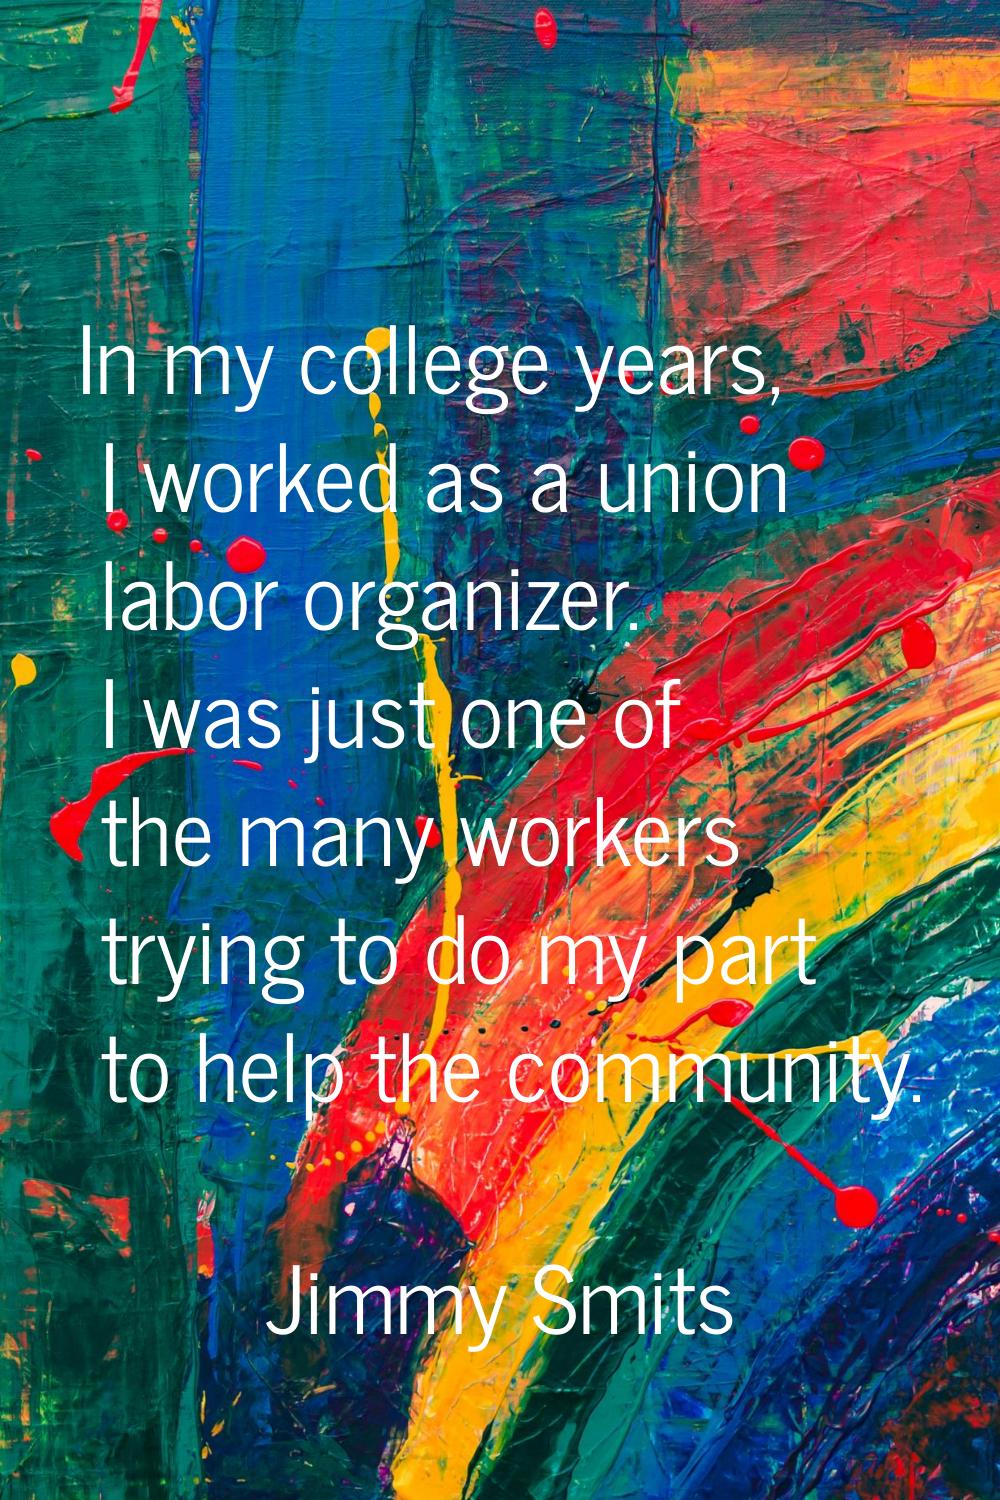 In my college years, I worked as a union labor organizer. I was just one of the many workers trying